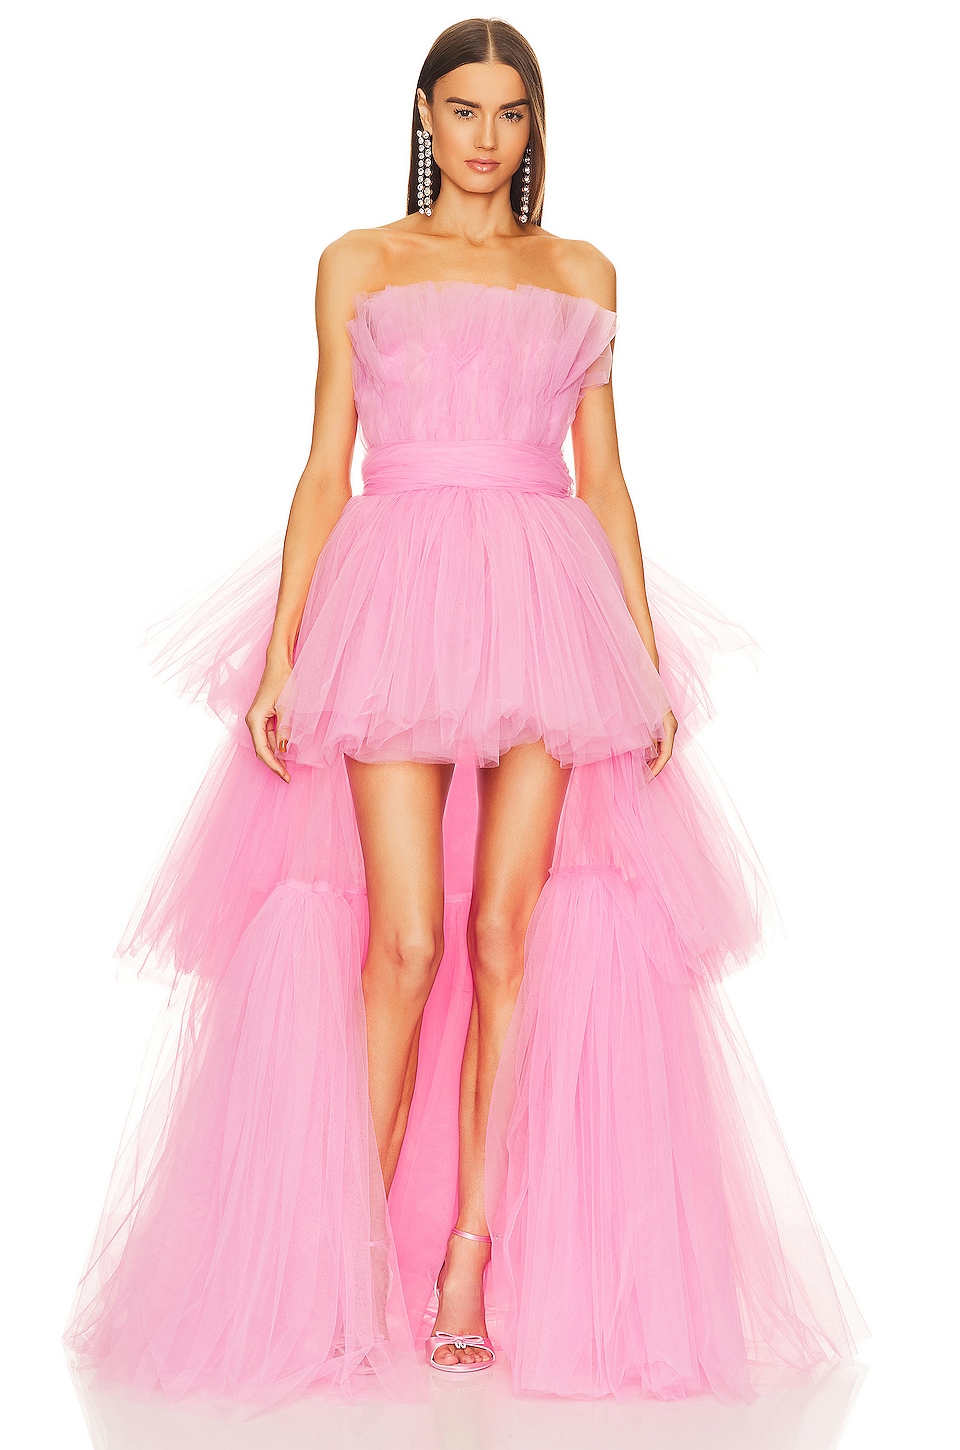 Baby Pink Tulle Strapless Sweetheart Formal Dress - Xdressy